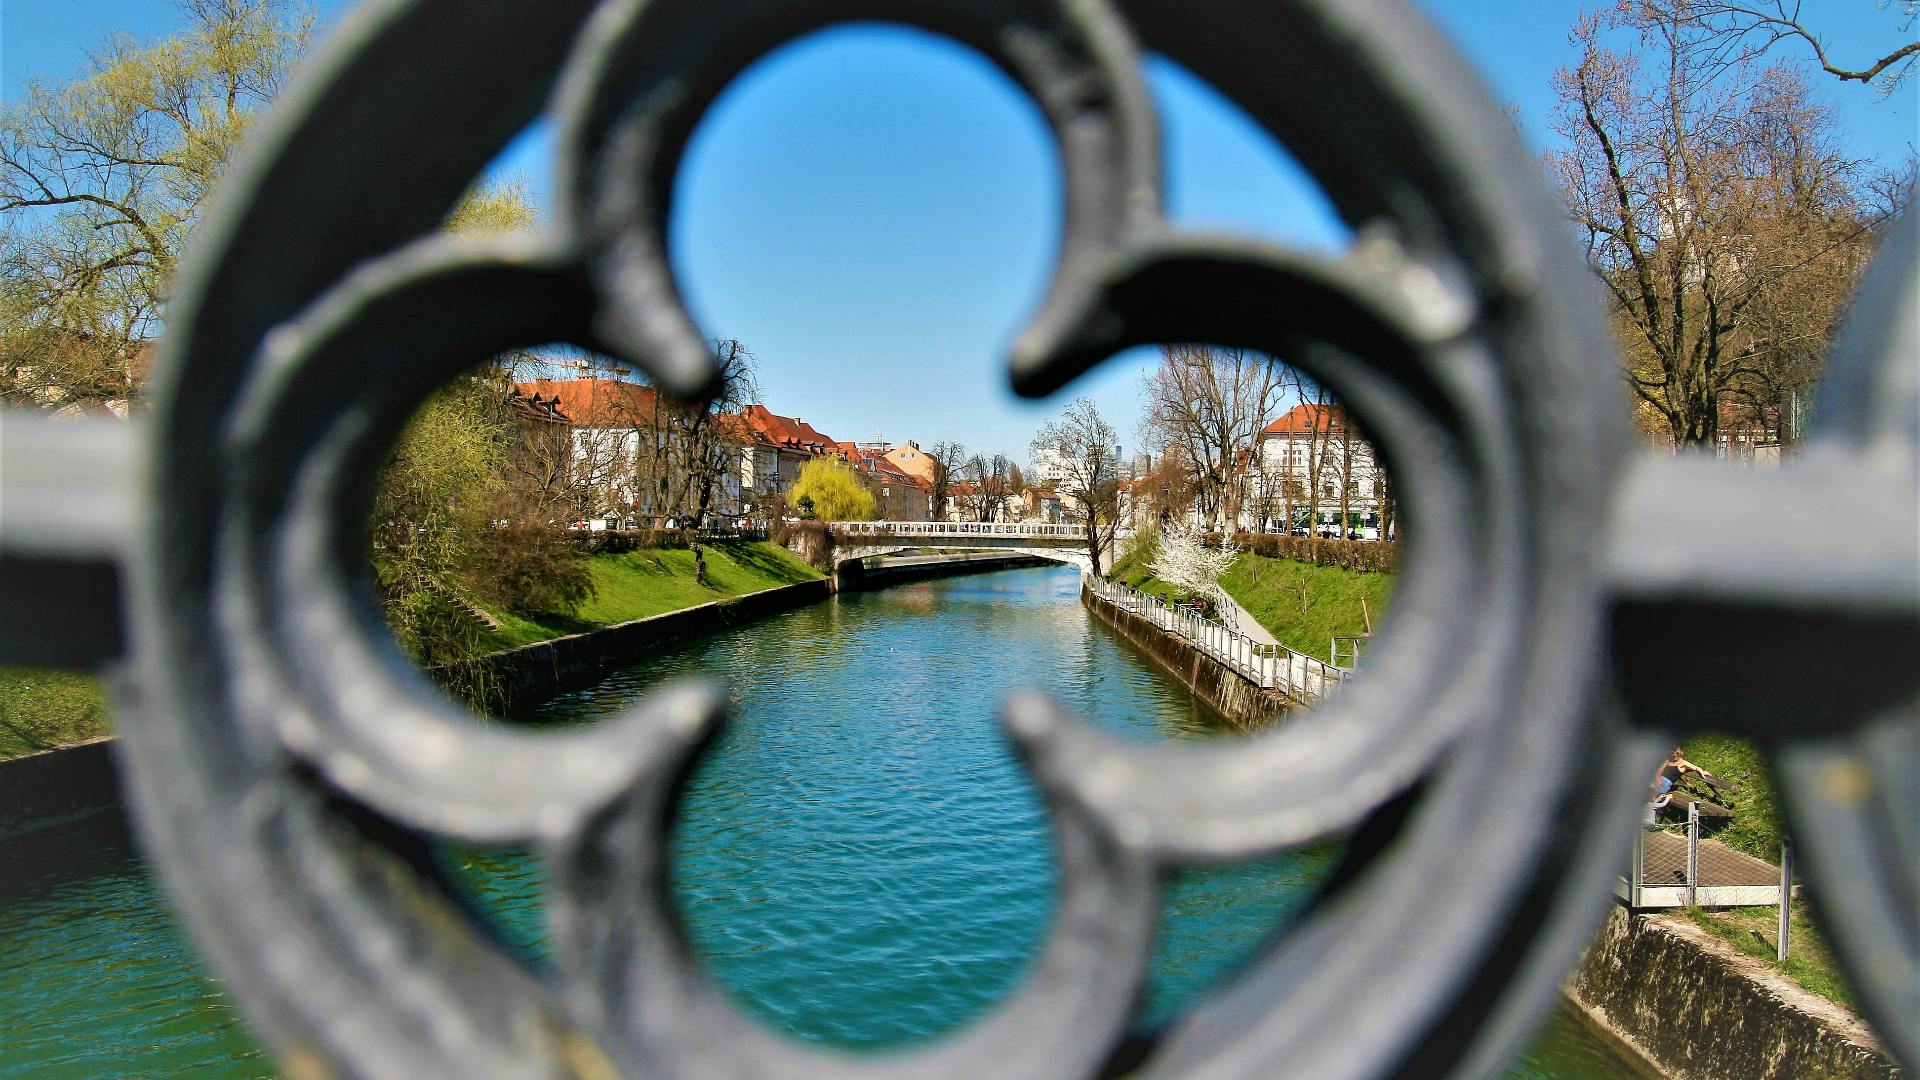 Self guided Discovery Walk in Ljubljana green city adventure and history Musement